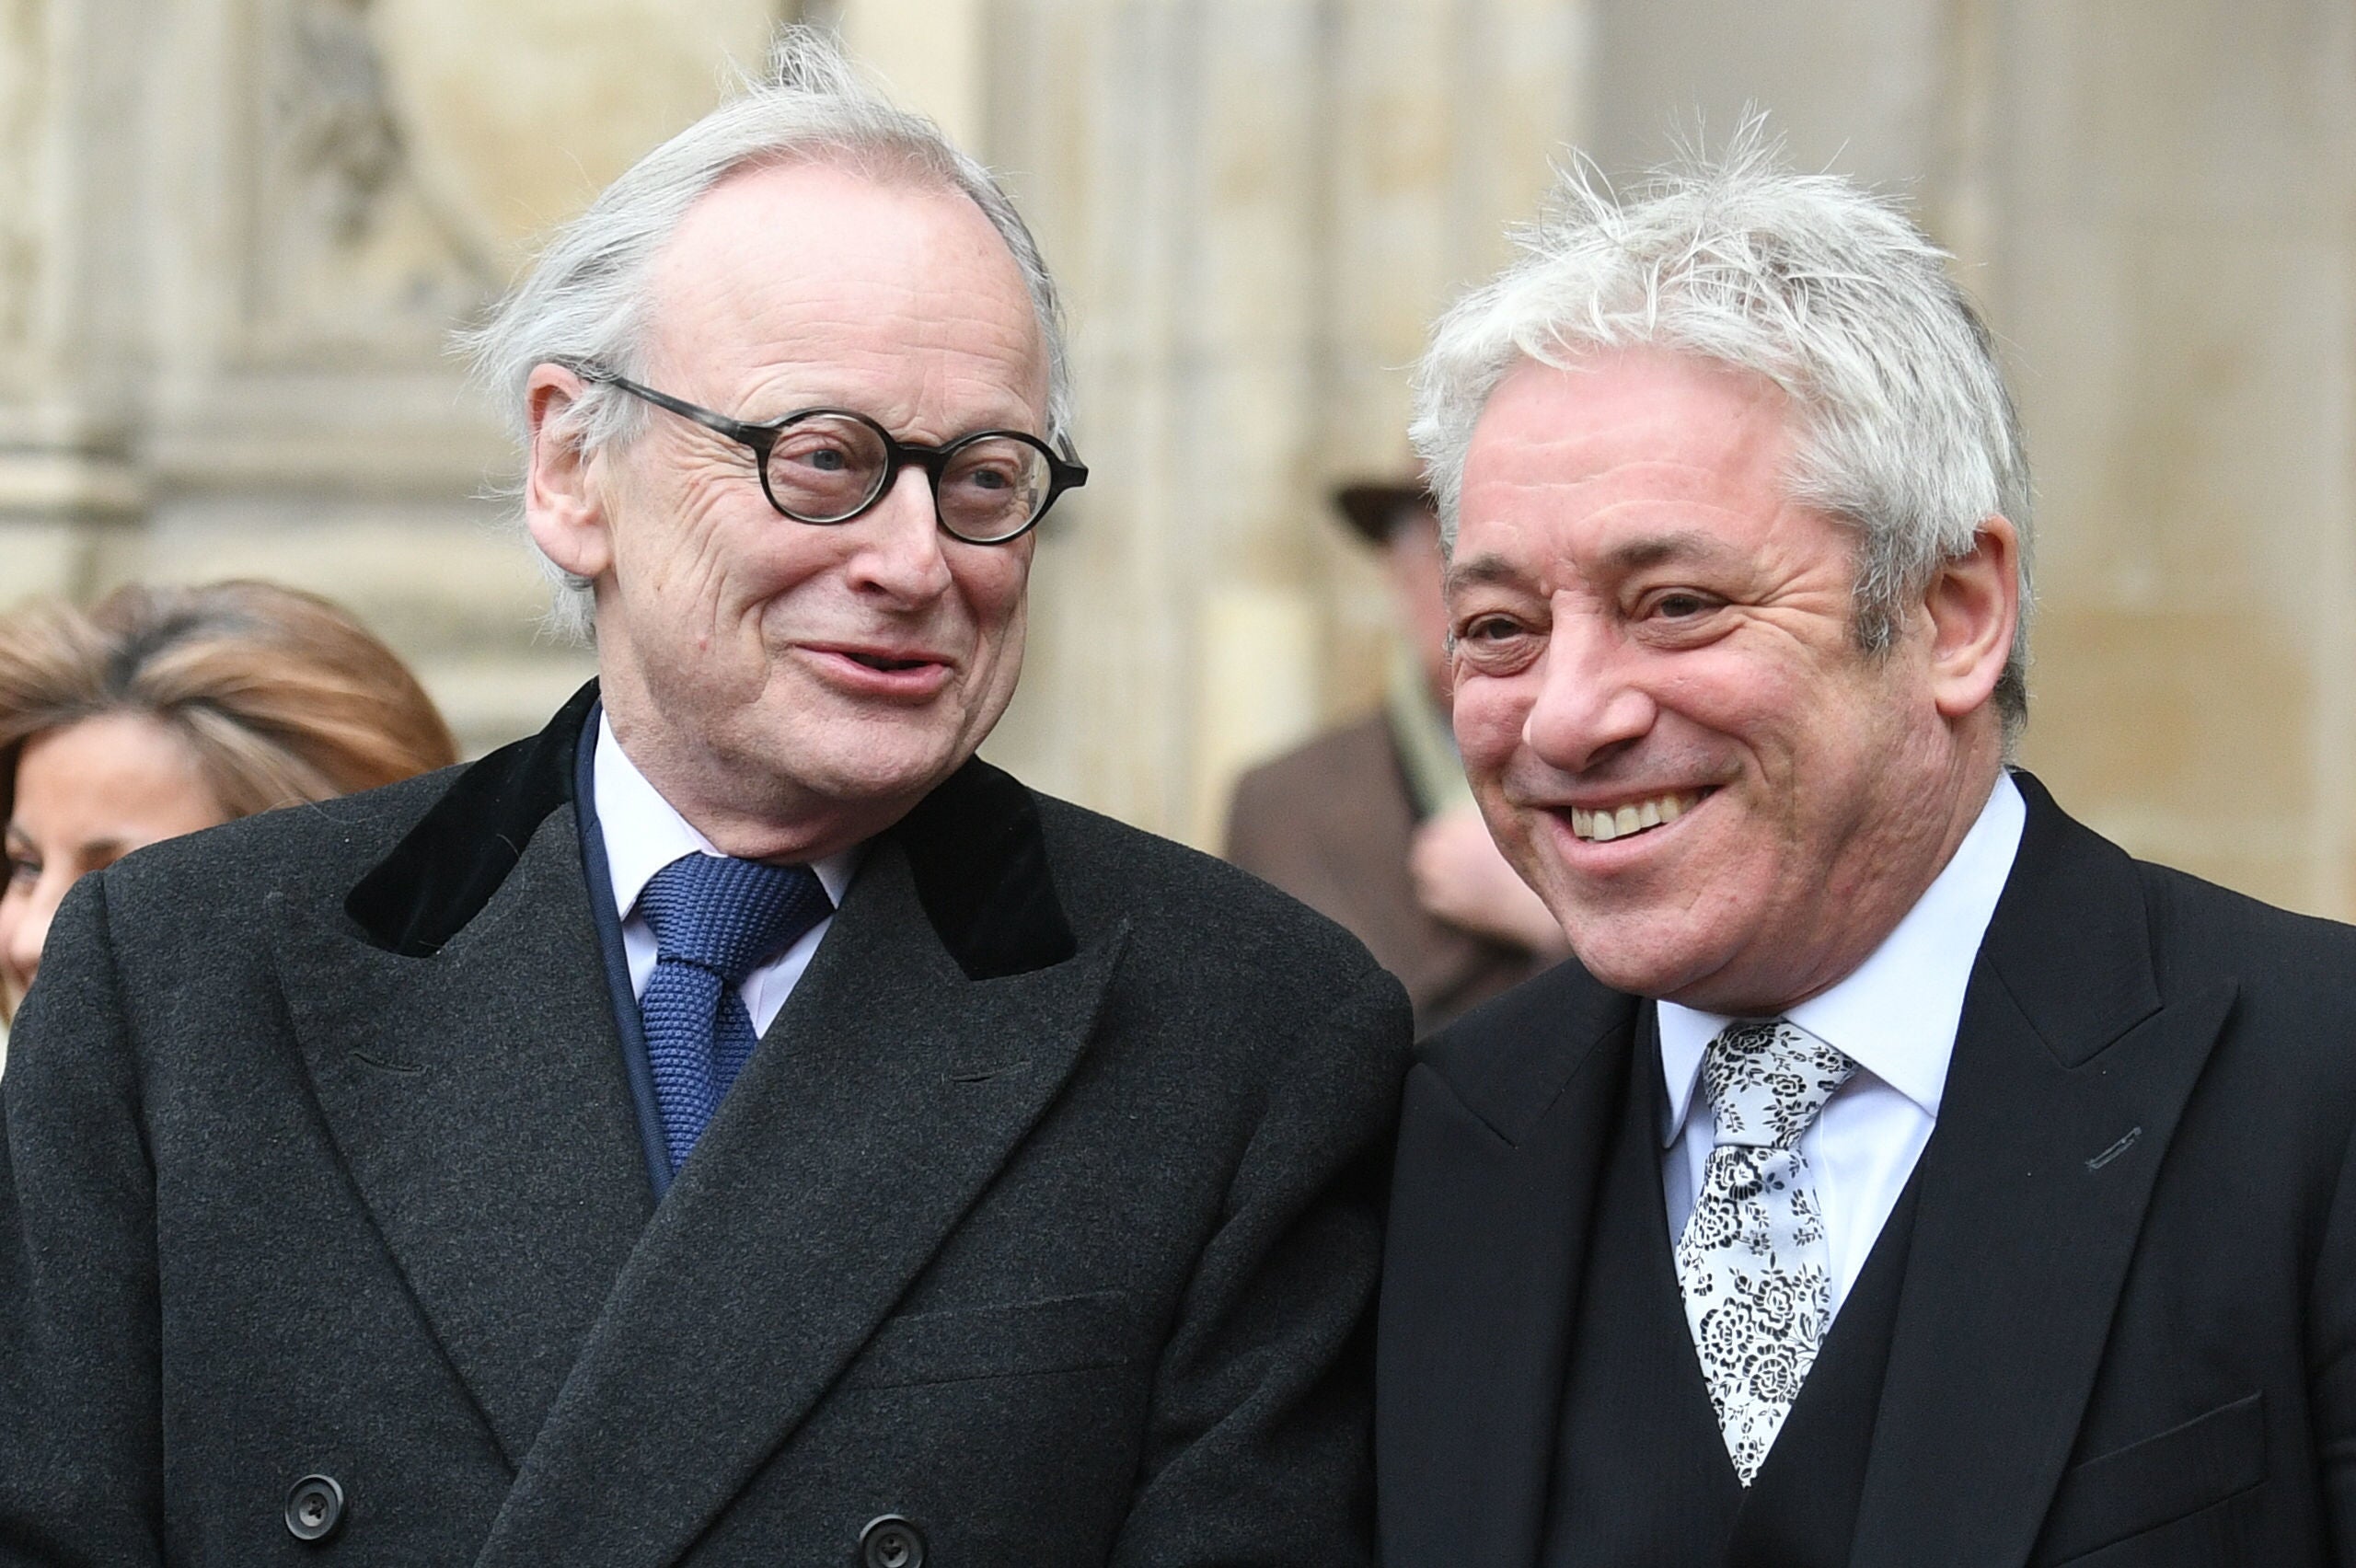 Lord Deben (left) with former Commons speaker John Bercow. Only one of them is an ex-Conservative